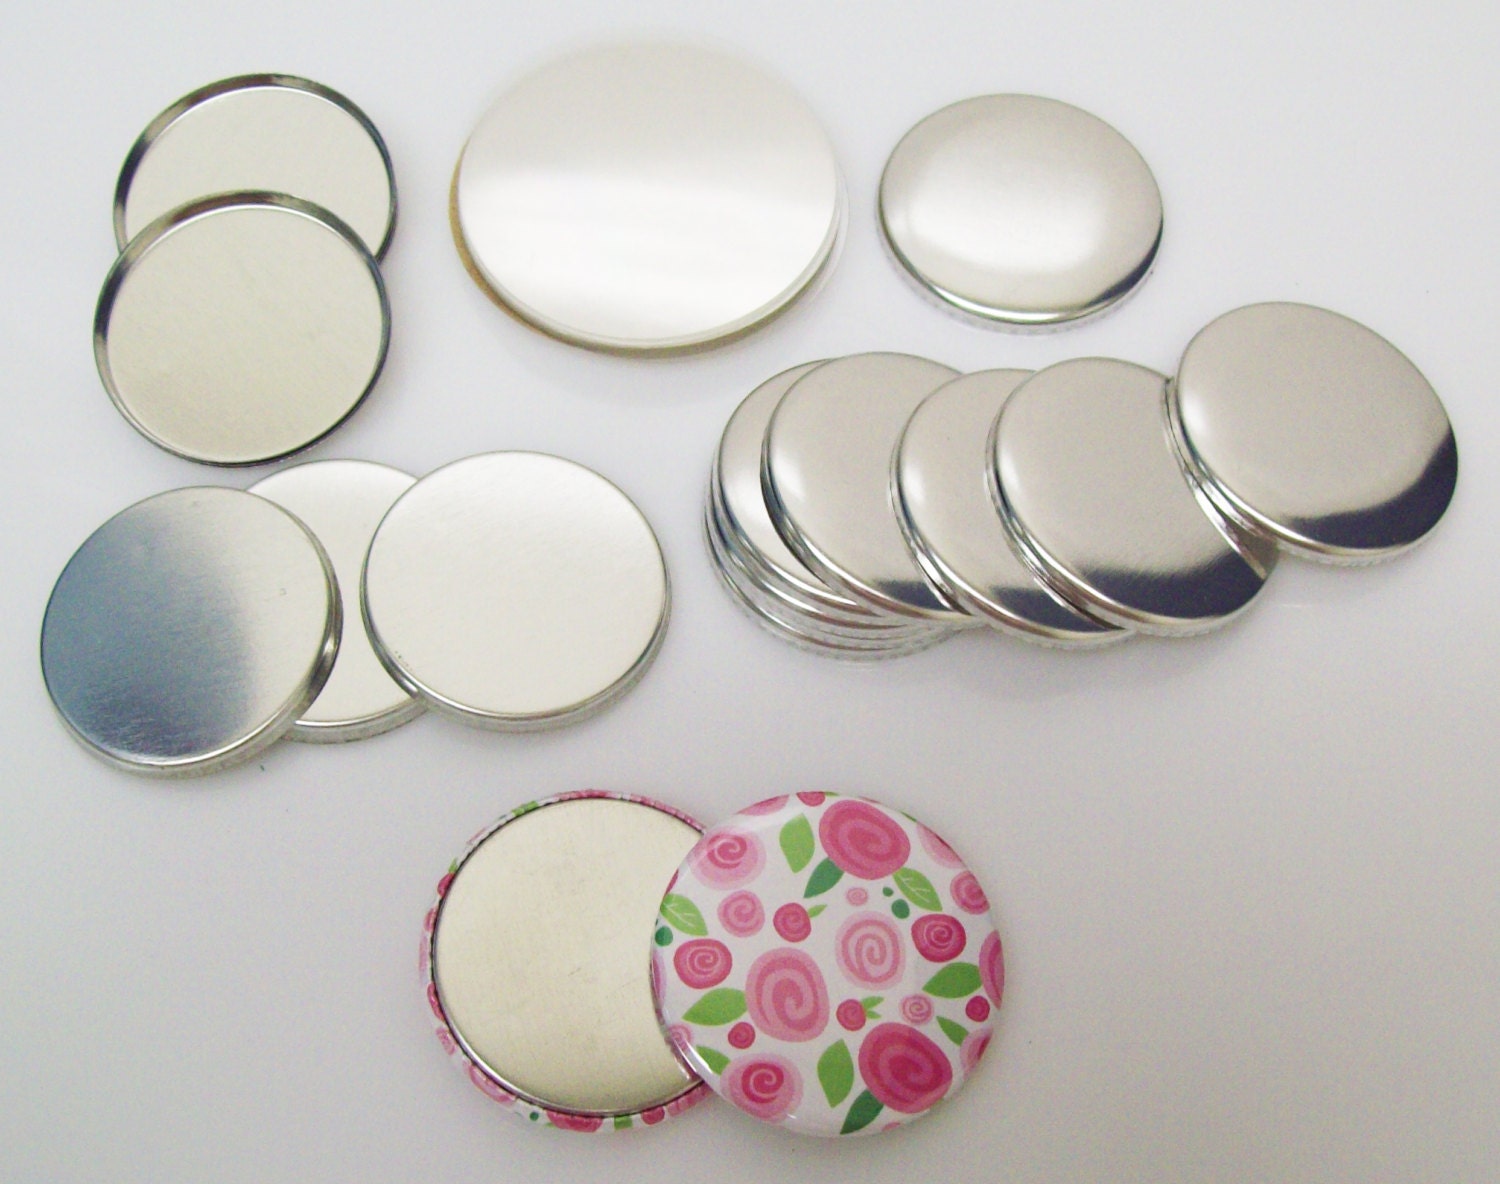  20PCS Sublimation Blank Pins DIY Button Badge Kit Sublimation  Silver Blank Aluminum Sheet with Butterfly Pin Backs for DIY Craft Jewelry  Lapel Making Supplies (Square,Silver, 20pcs) : Everything Else